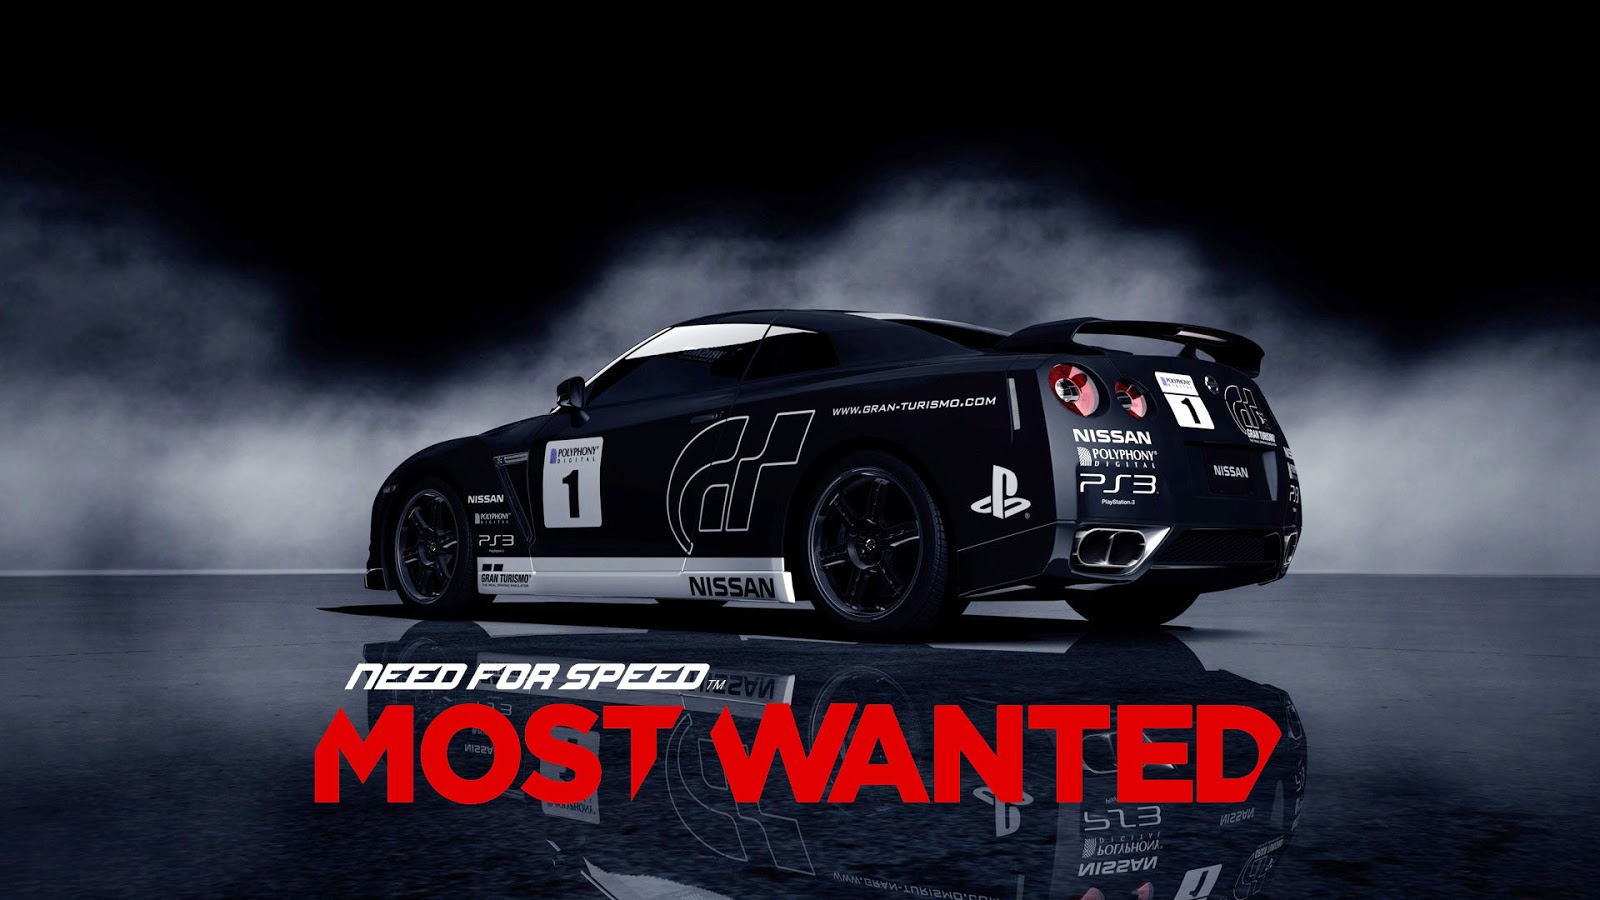 WALLPAPER ANDROID - IPHONE: Need For Speed Most Wanted 